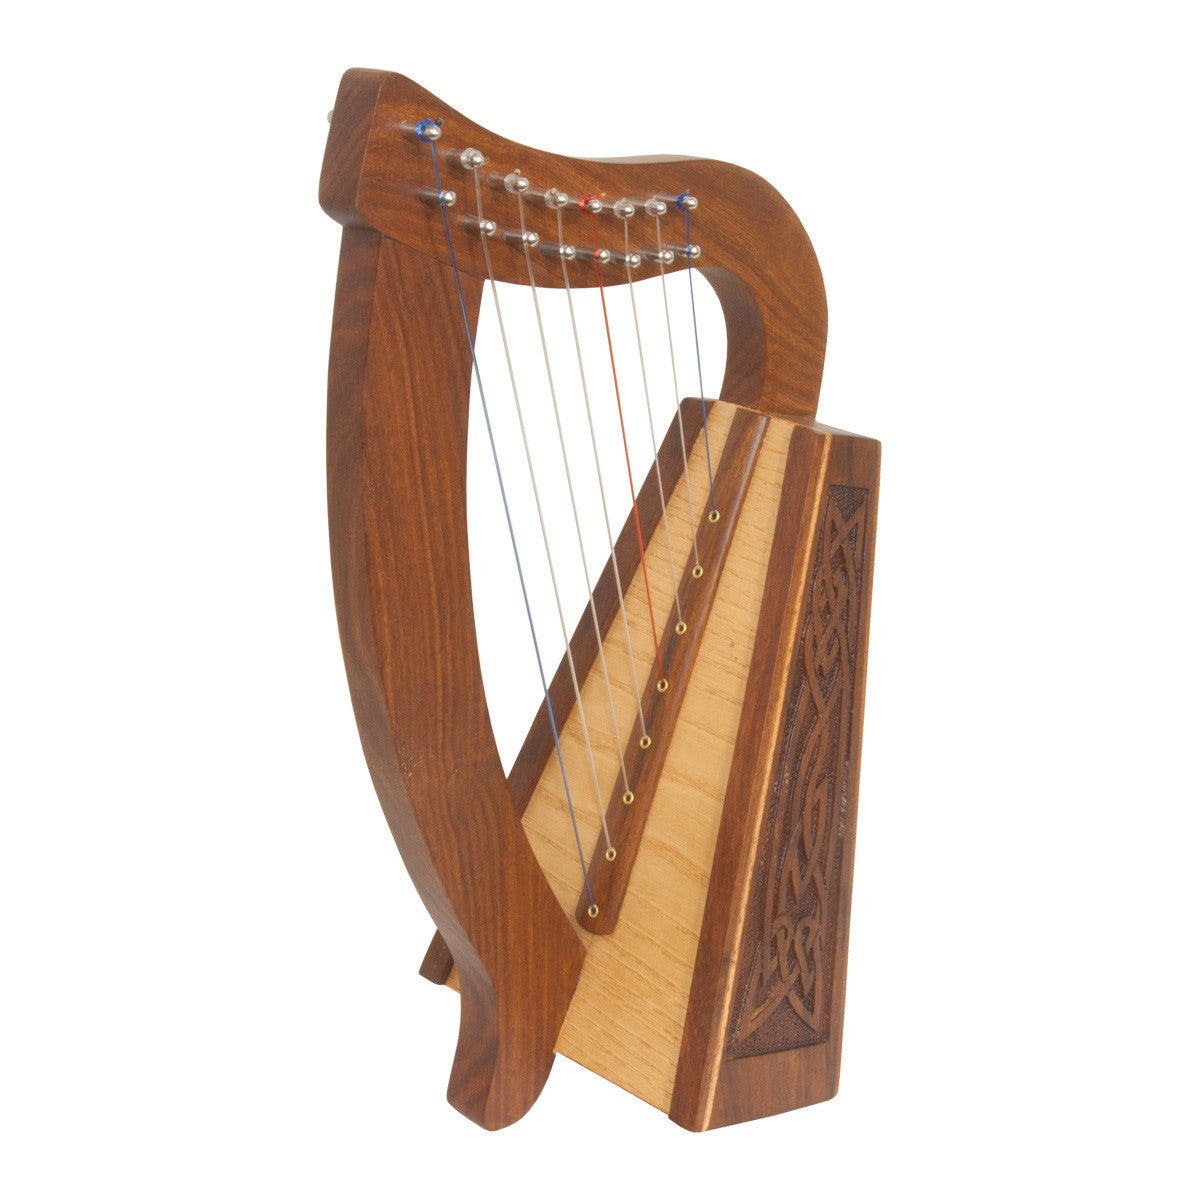 8-String Lily Harp, Roosebeck - Knotwork Carvings